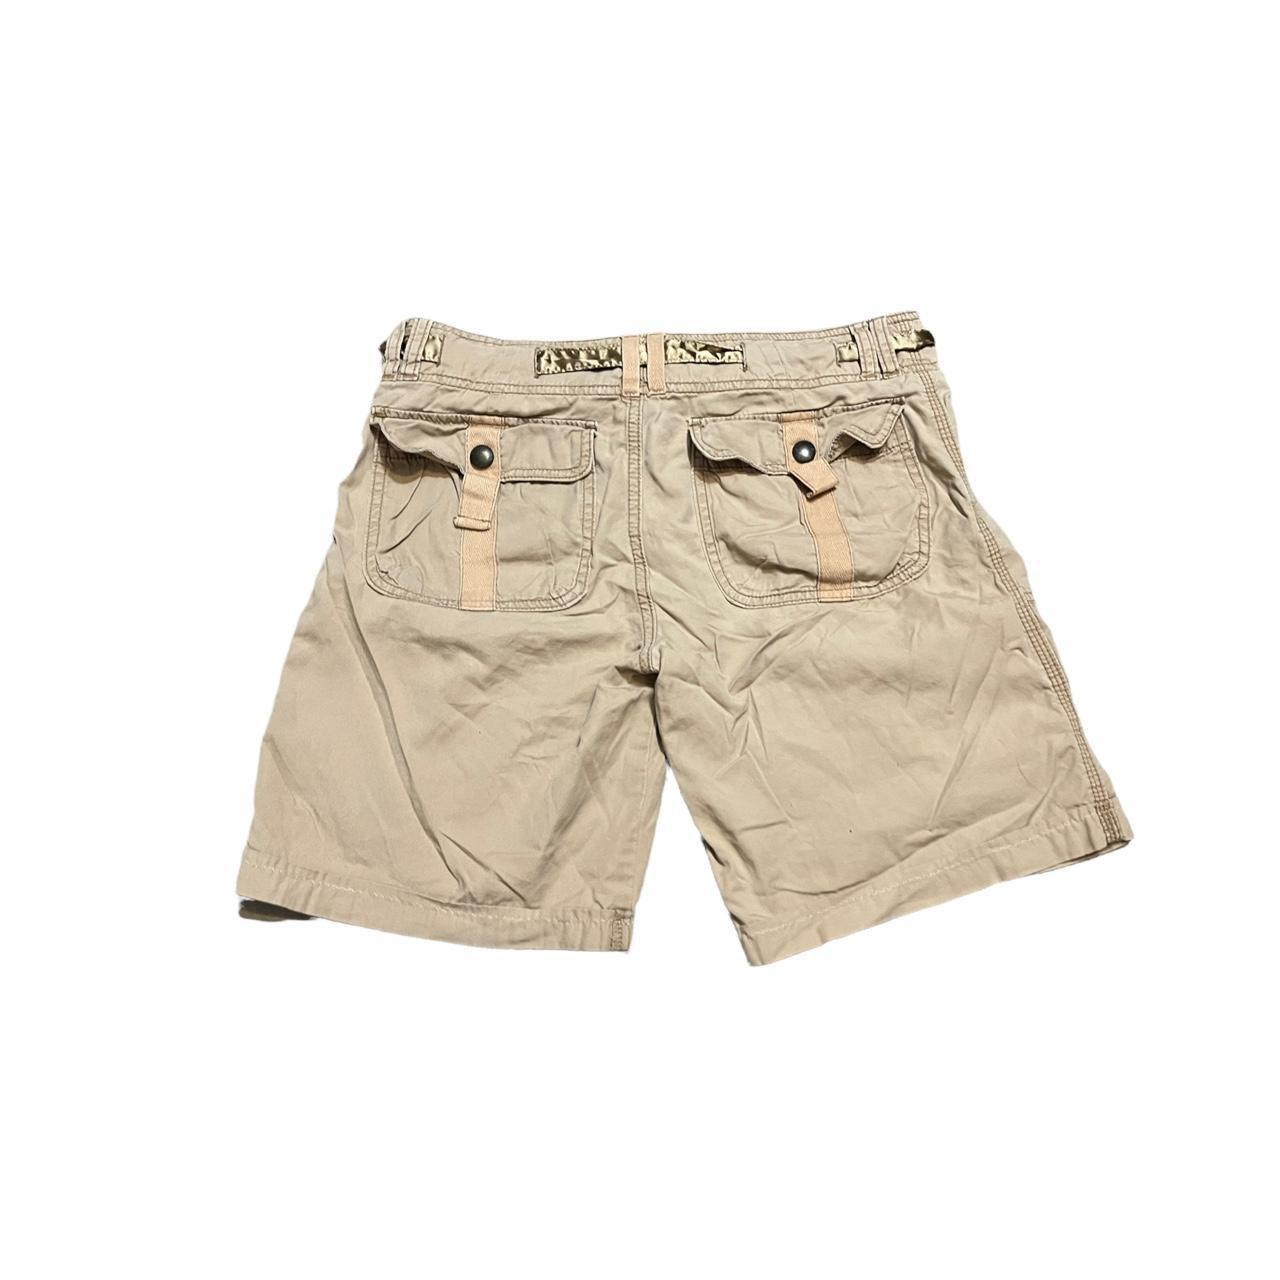 Abercrombie & Fitch Women's Tan and Cream Shorts | Depop